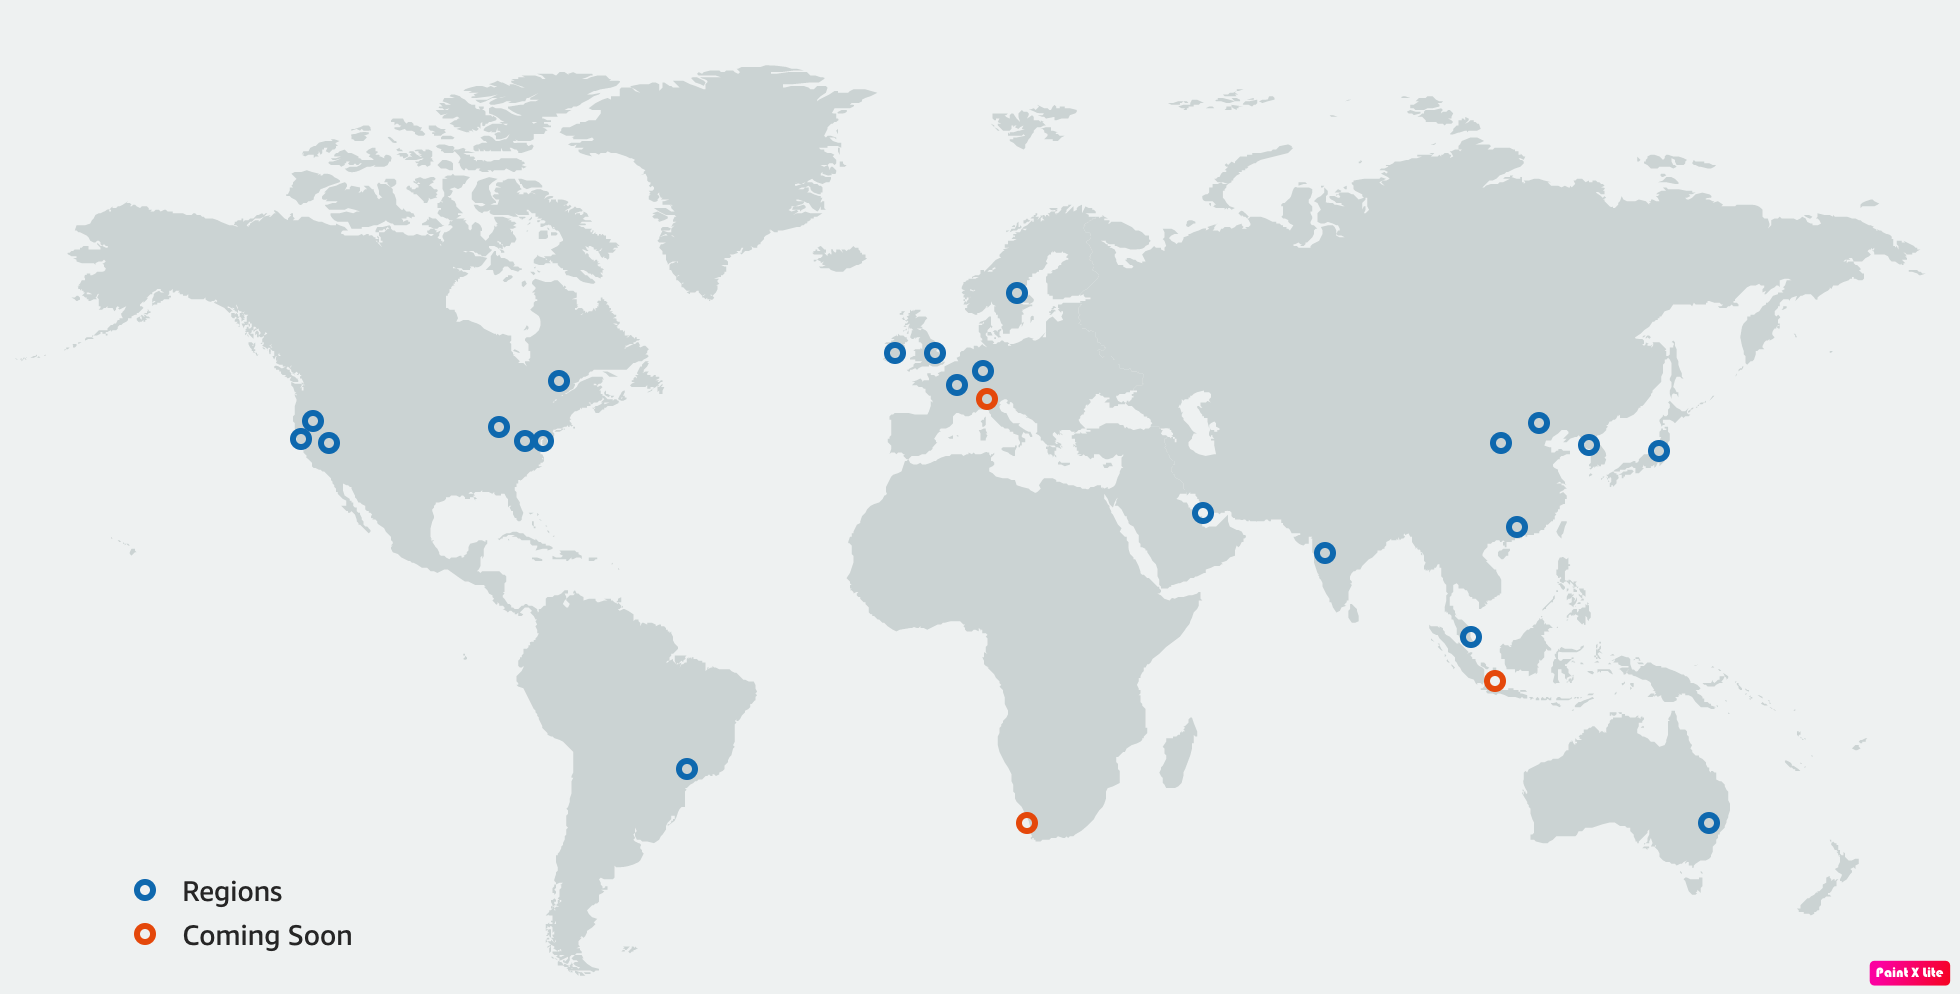 most recent locations list of AWS Regions shown on the World map